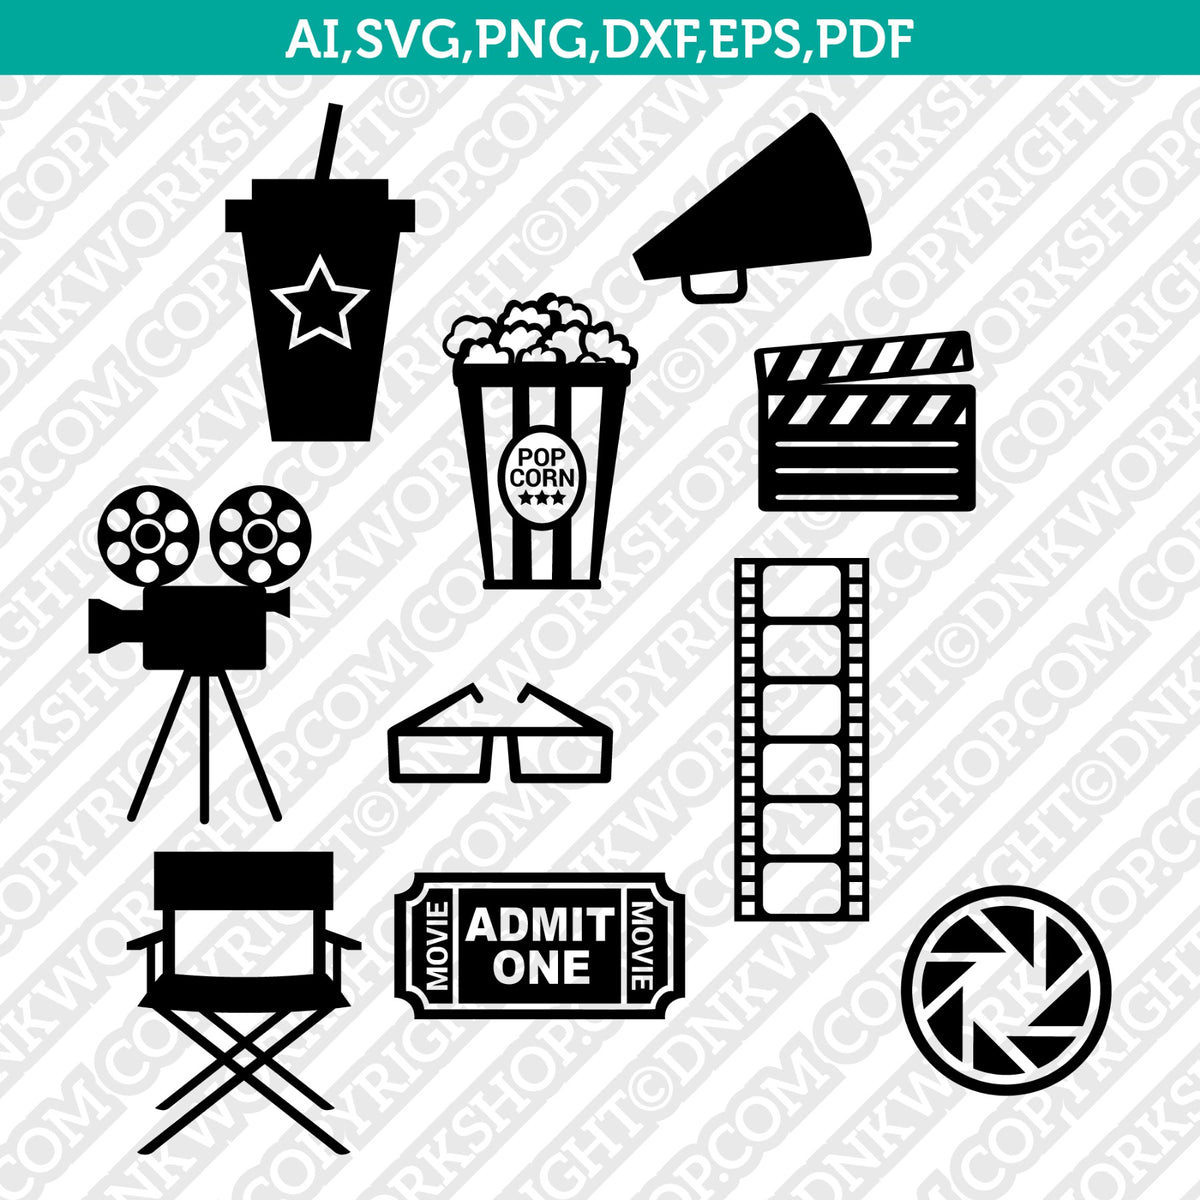 movie theater ticket clipart black and white